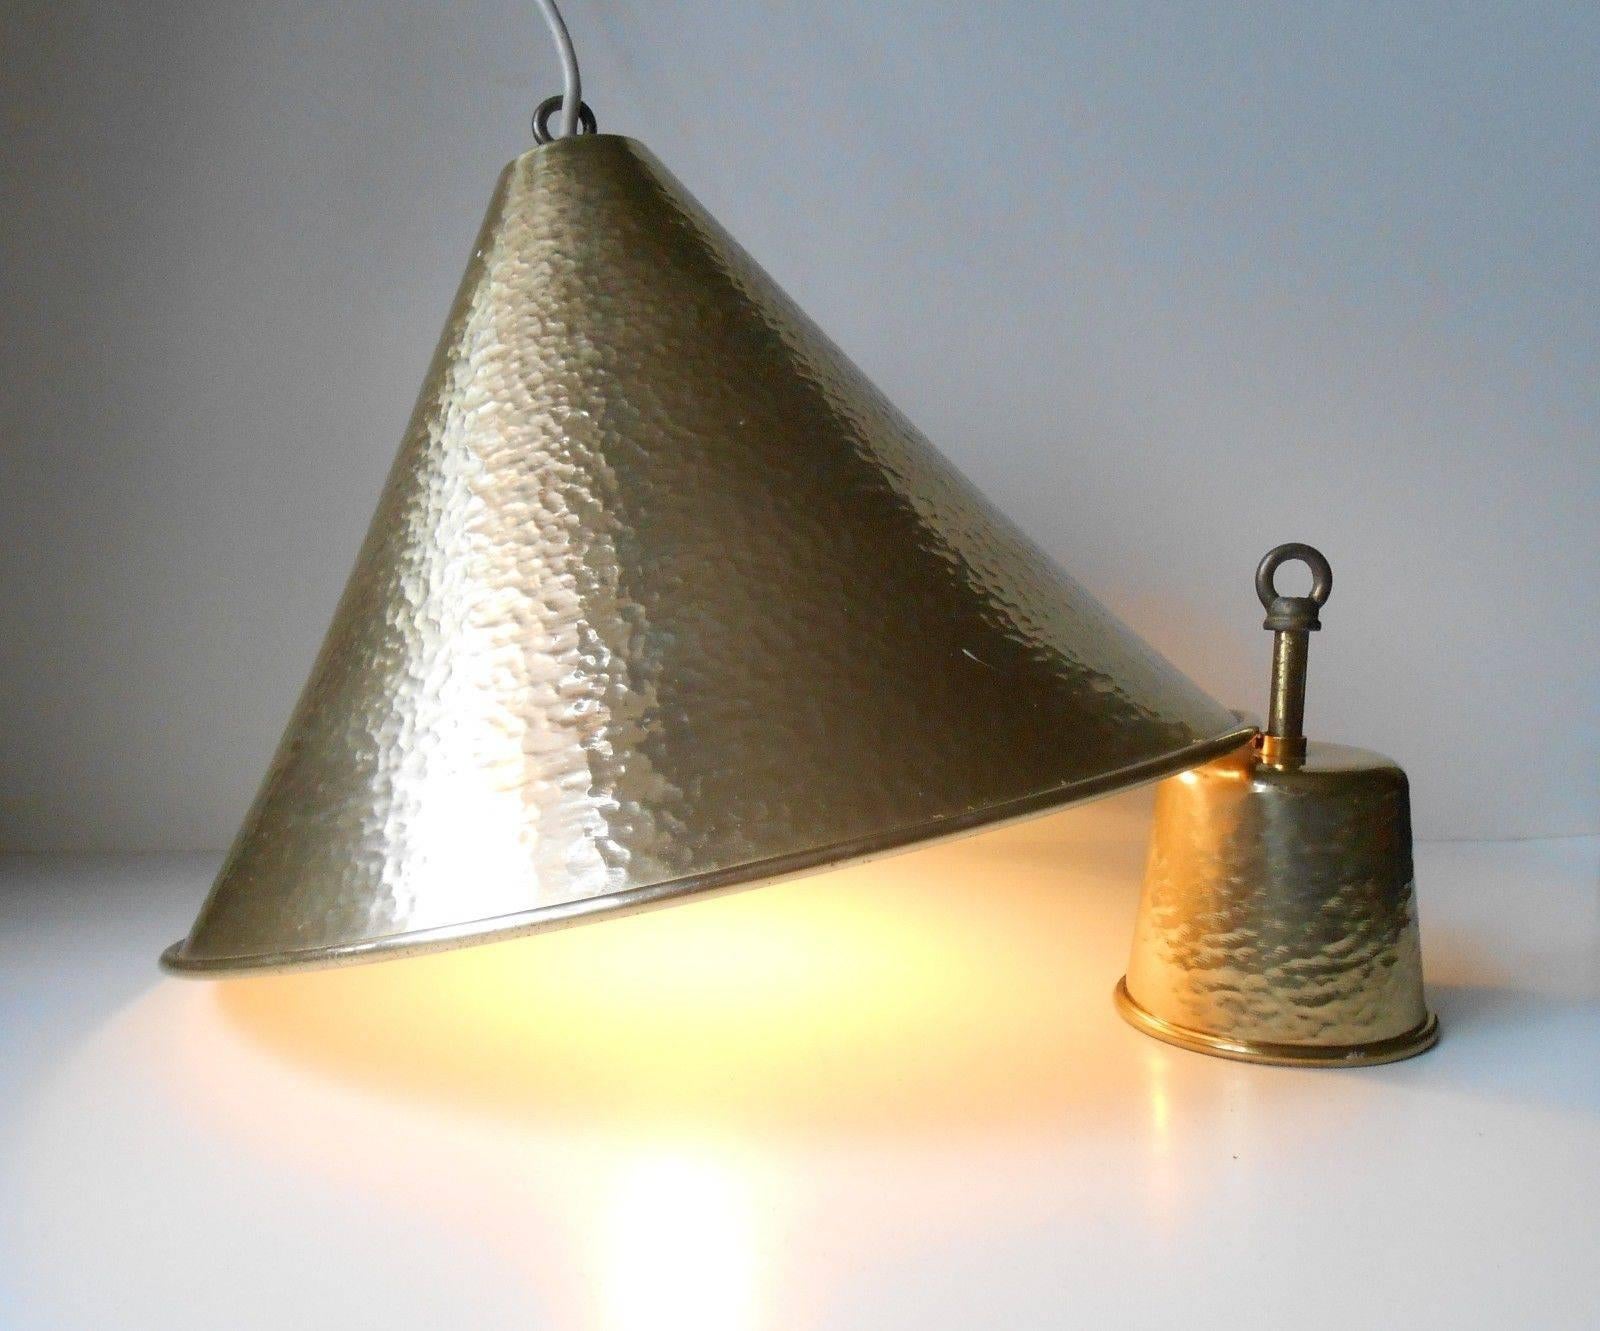 Conical Mid-Century ceiling light and matching canopy i solid hammered brass. It was manufactured in Denmark during the 1960s by Kobber Kompagniet.